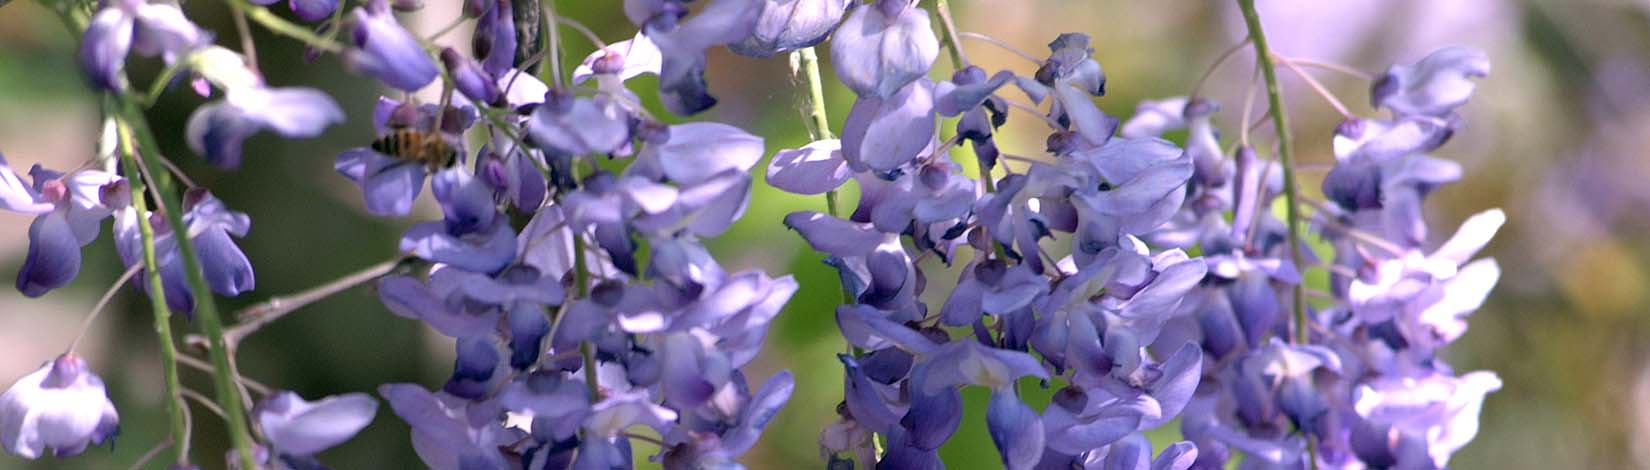 Wisteria, a poisonous plant in Florida